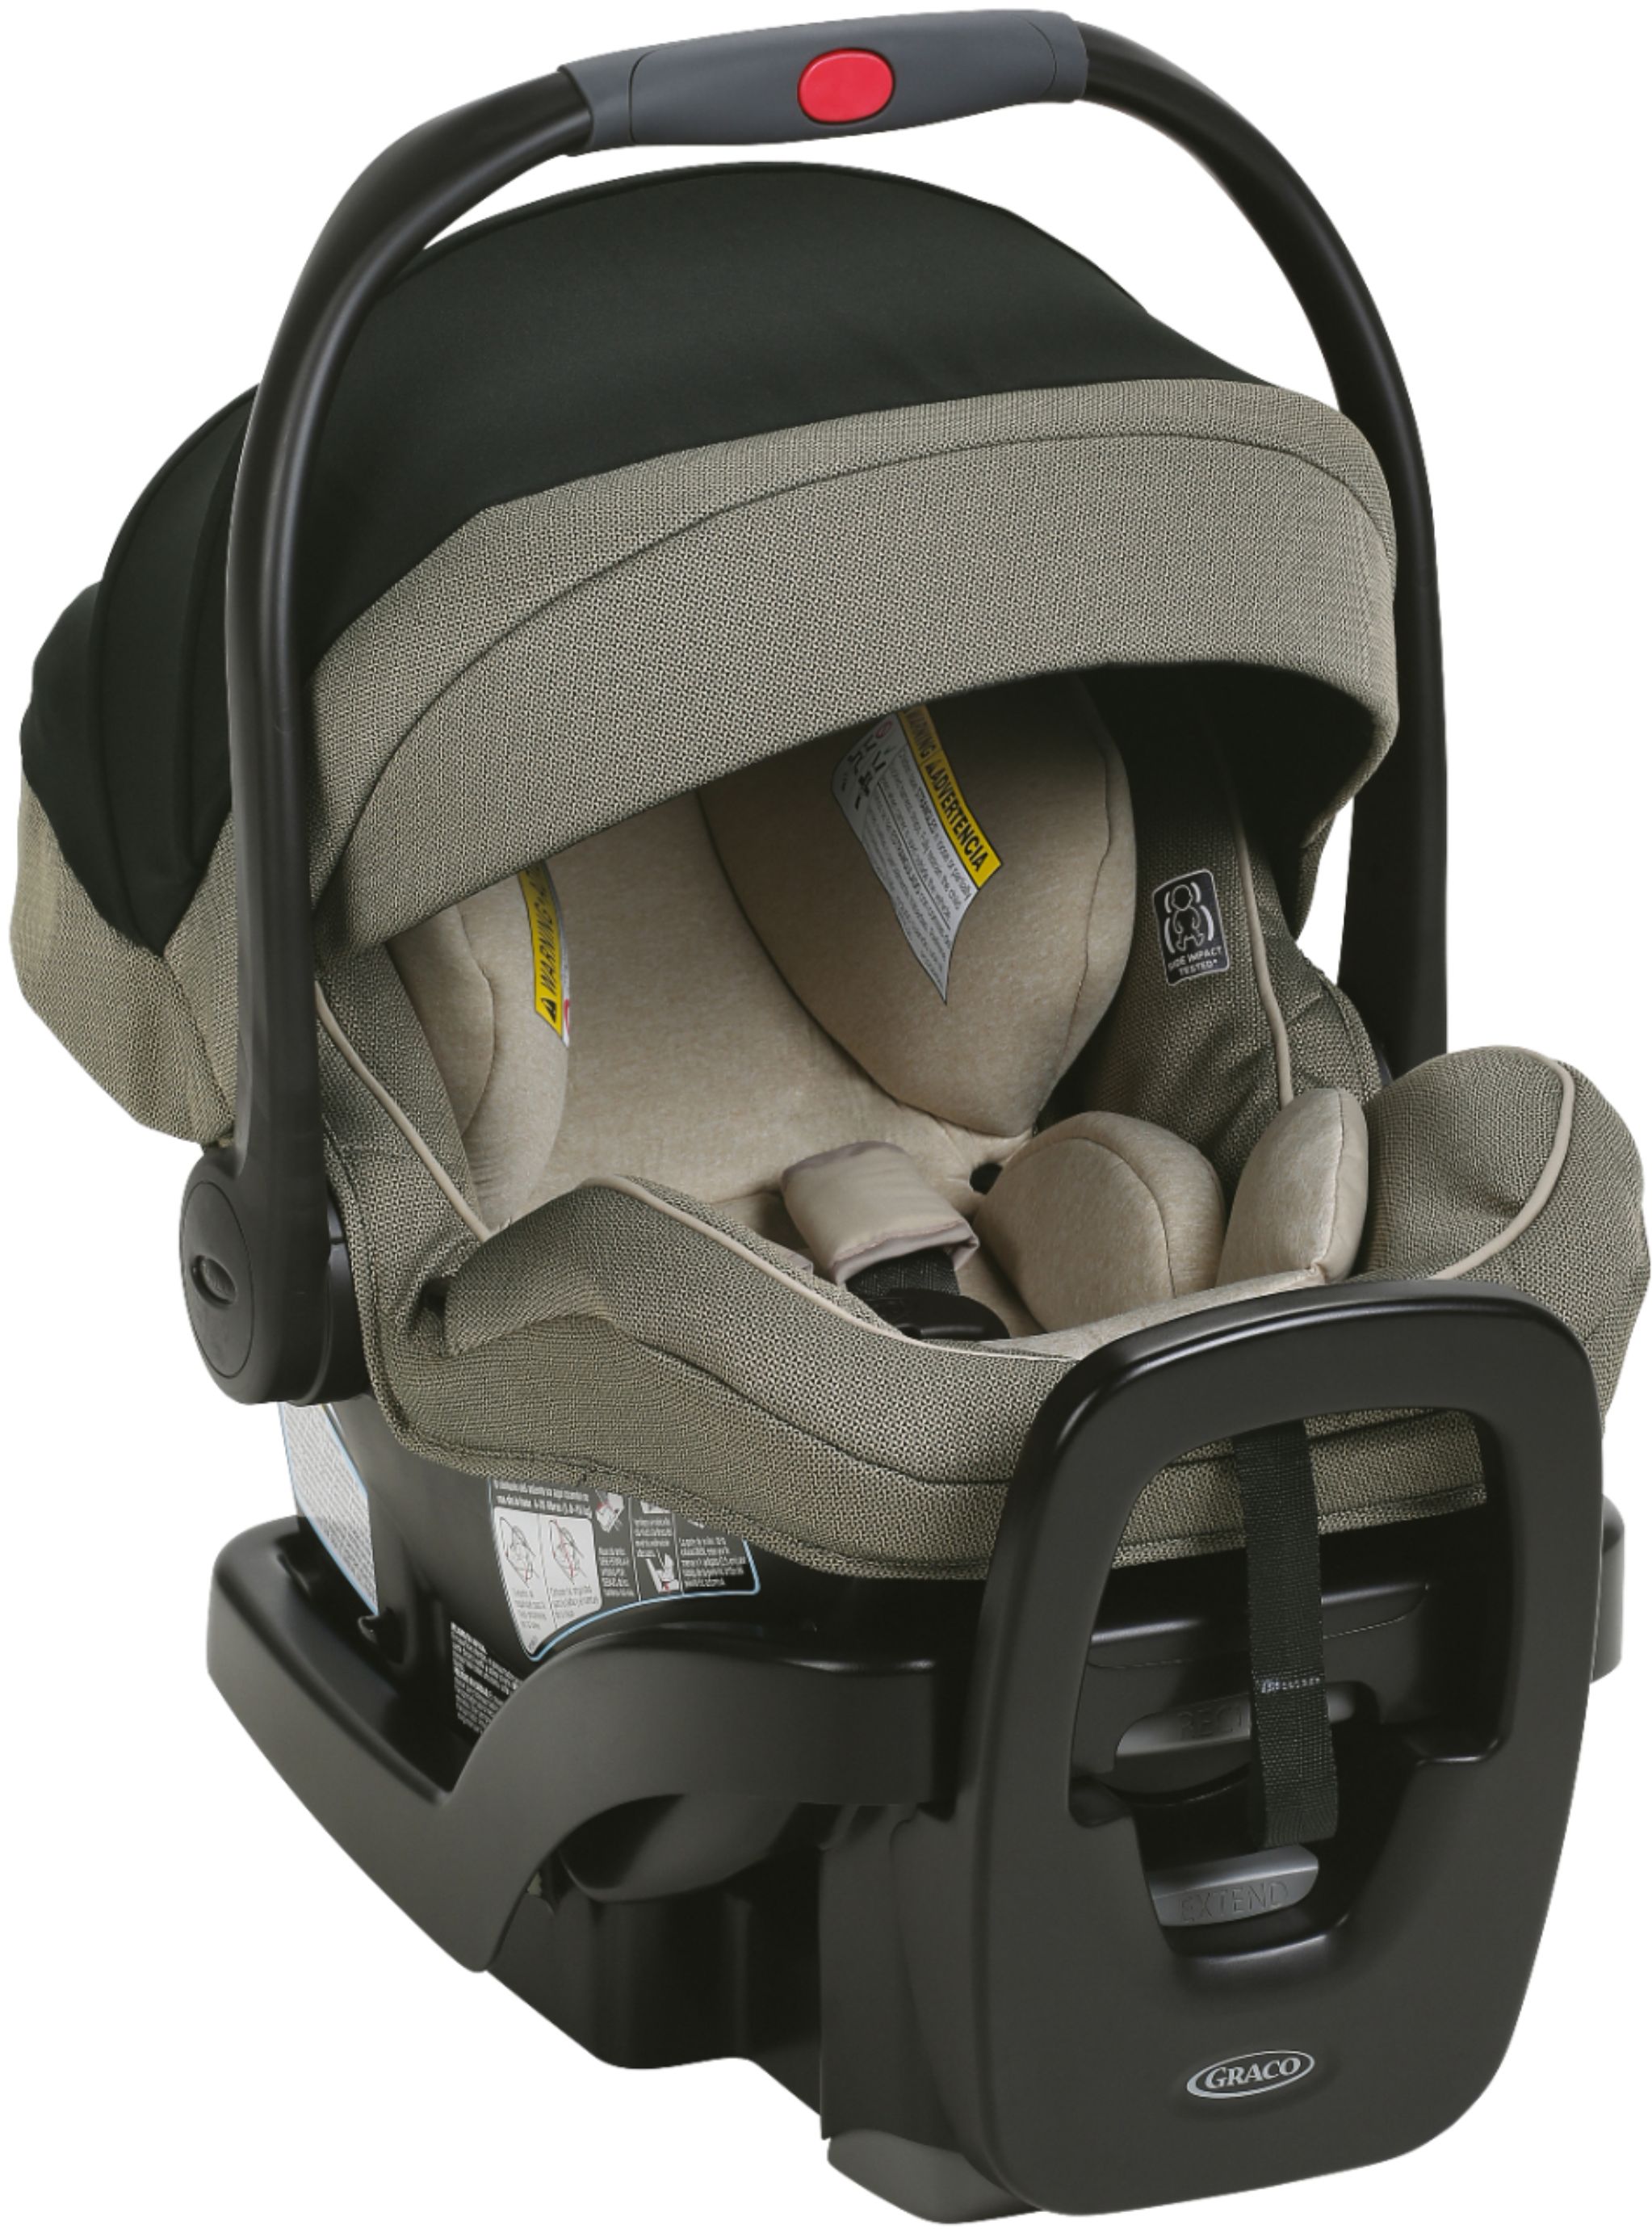 Angle View: Graco - UNO2DUO Travel System - Reese